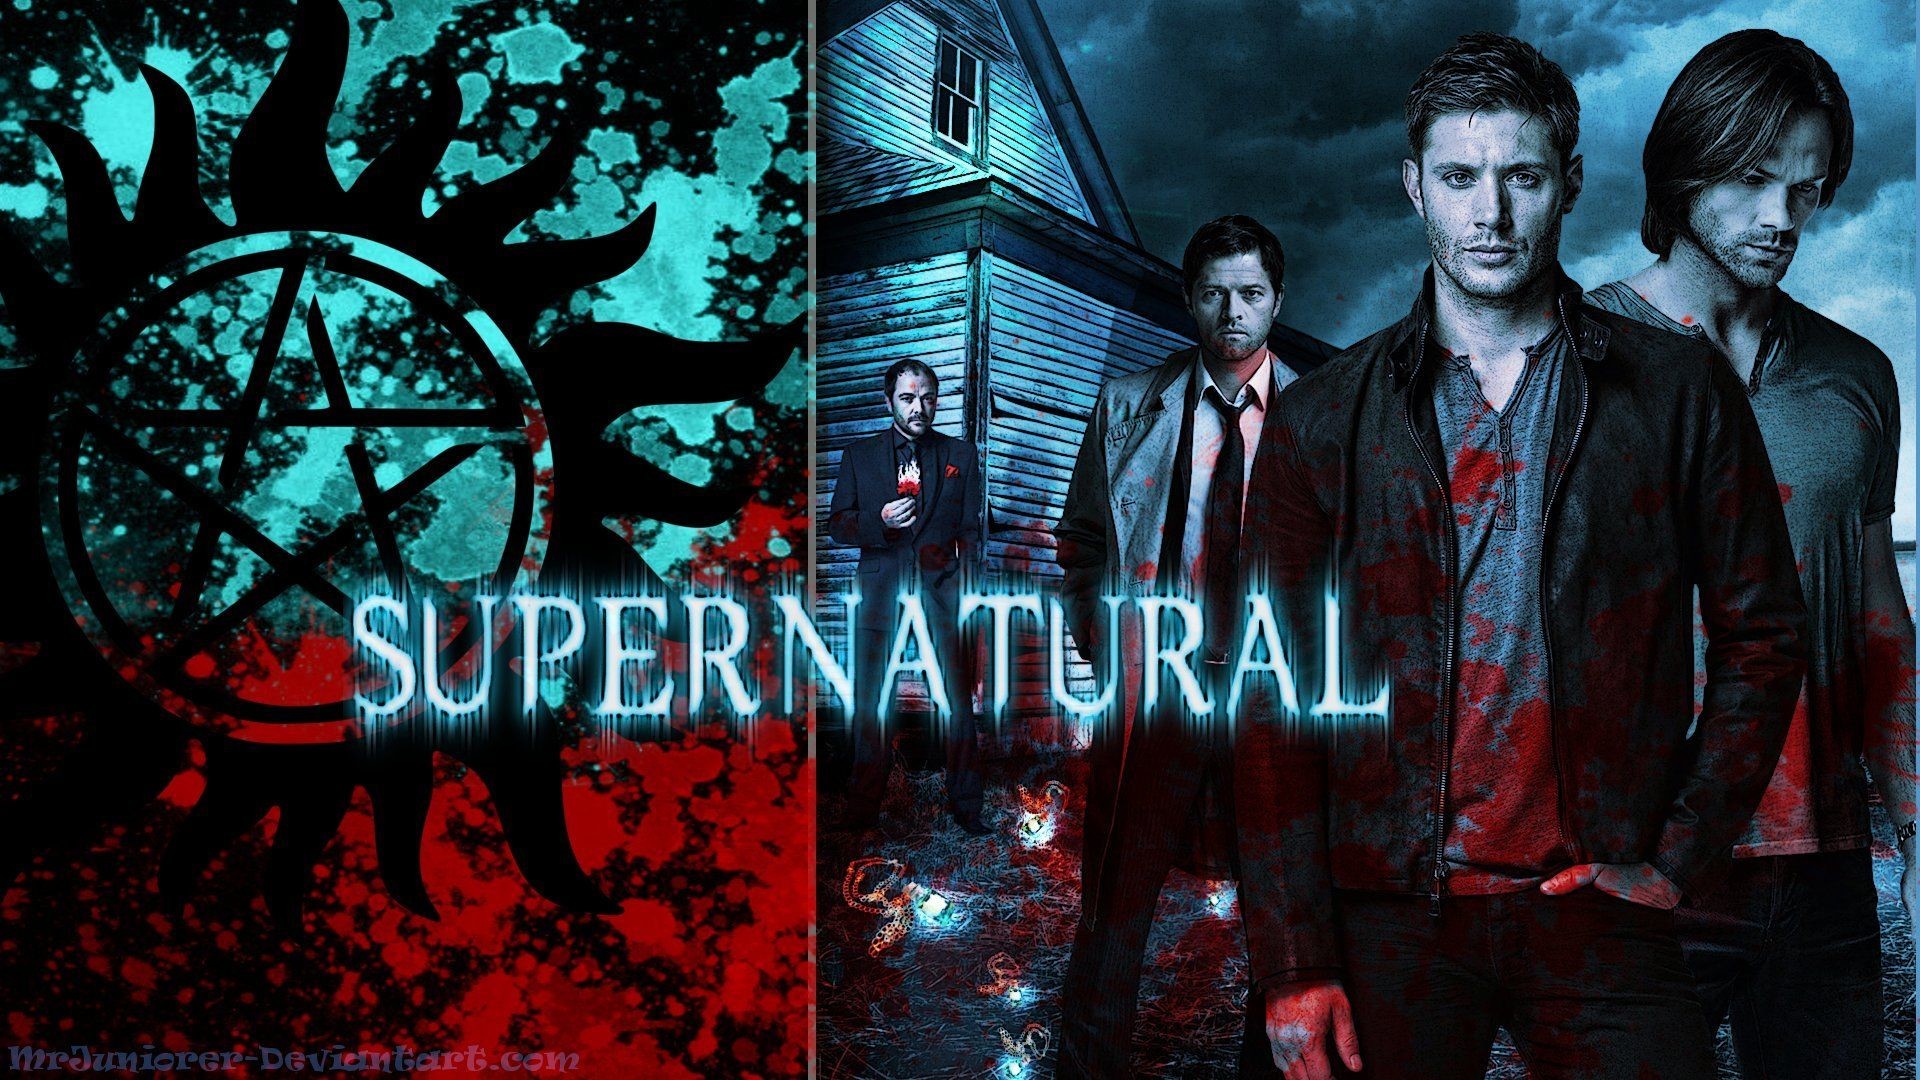 1920x1080 Supernatural Wallpapers High Resolution and Quality Download